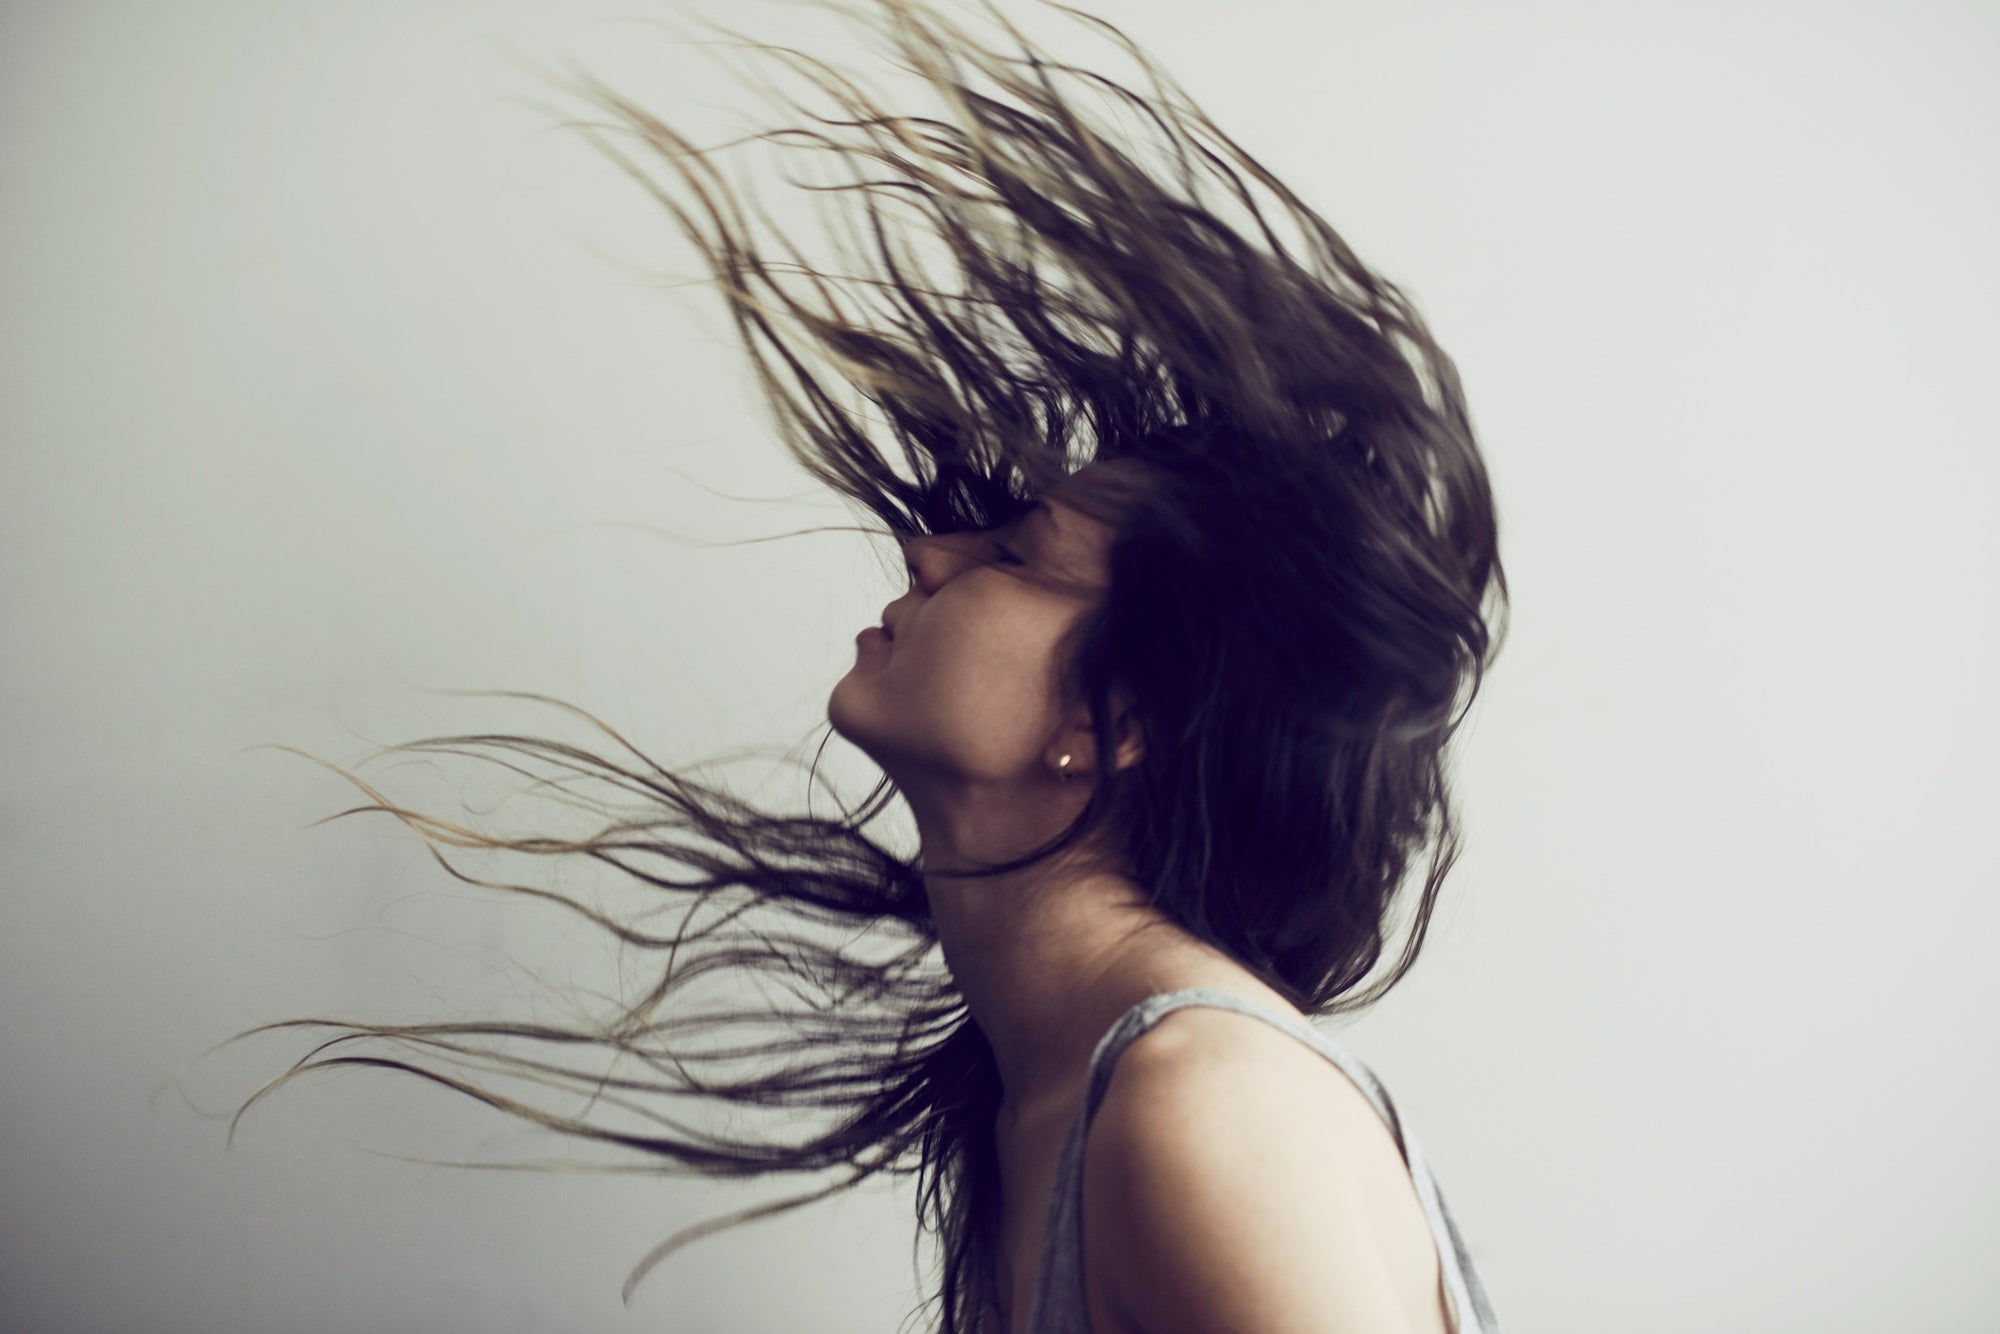 Woman With Hair Flying In The Air 